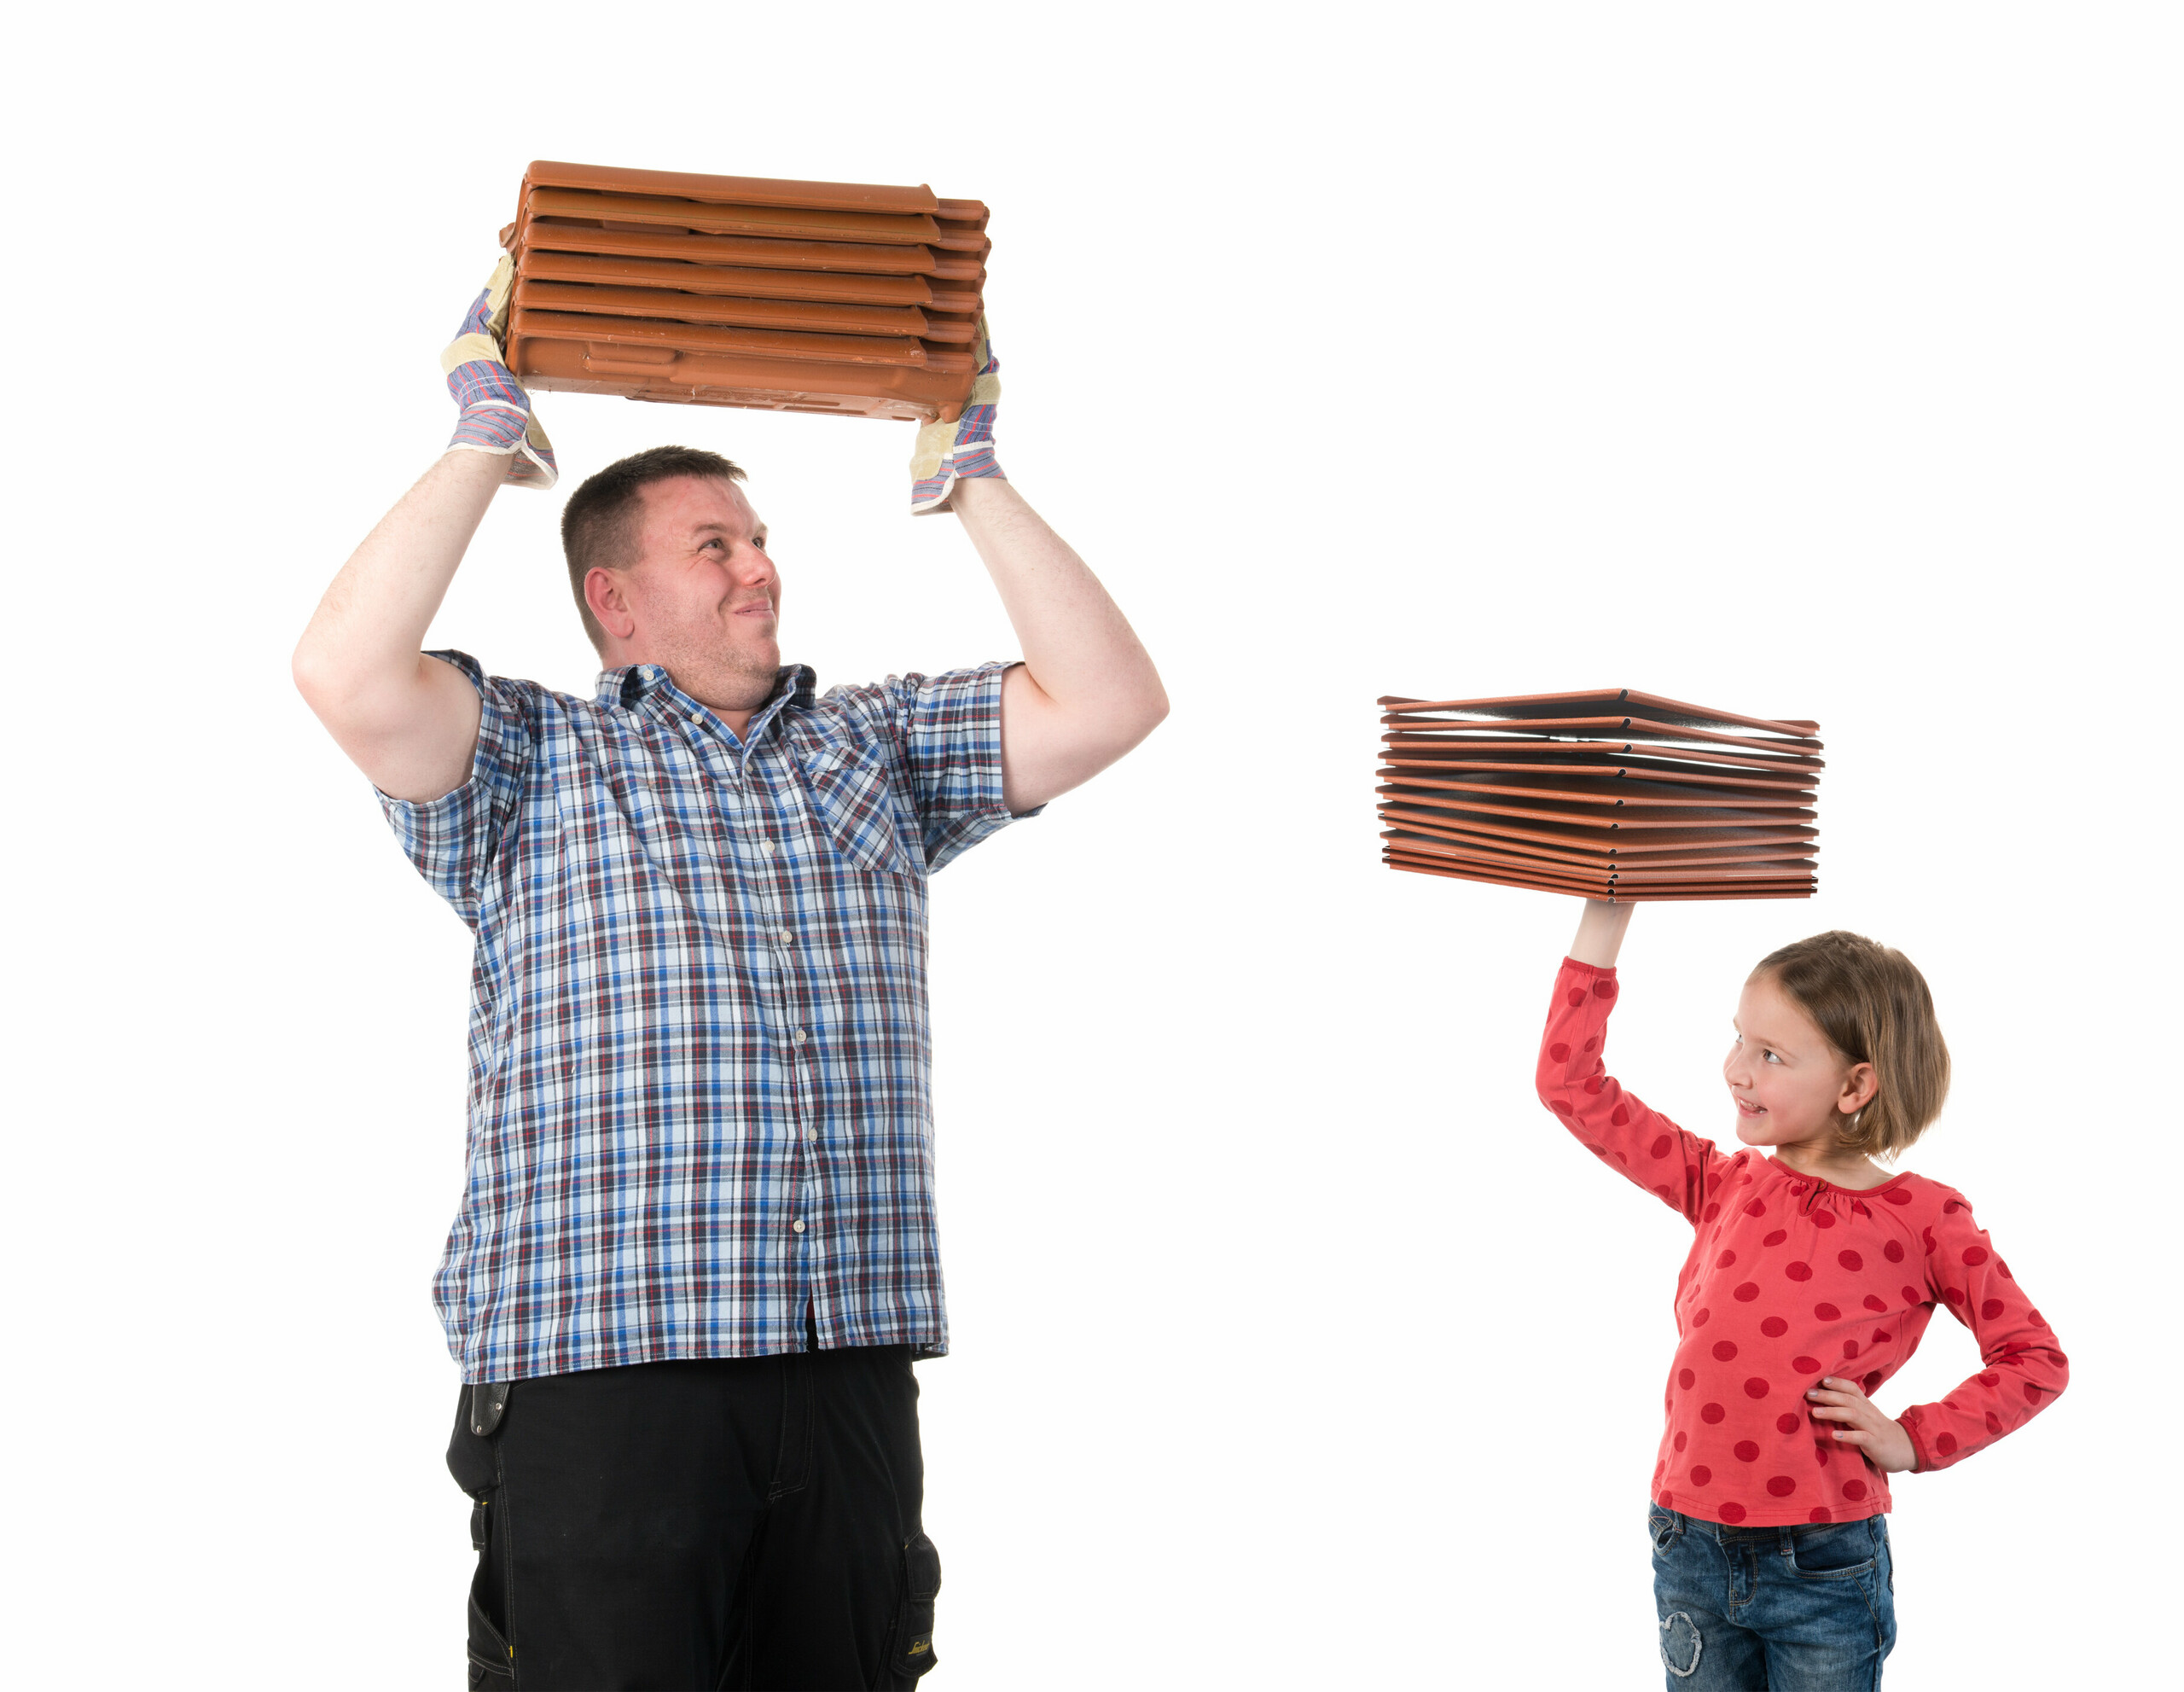 The advantage of lightweight PREFA products in comparison to conventional tiles — illustrated by a little girl, effortlessly holding up PREFA products with one hand, while a man struggles under the weight of heavy traditional tiles.